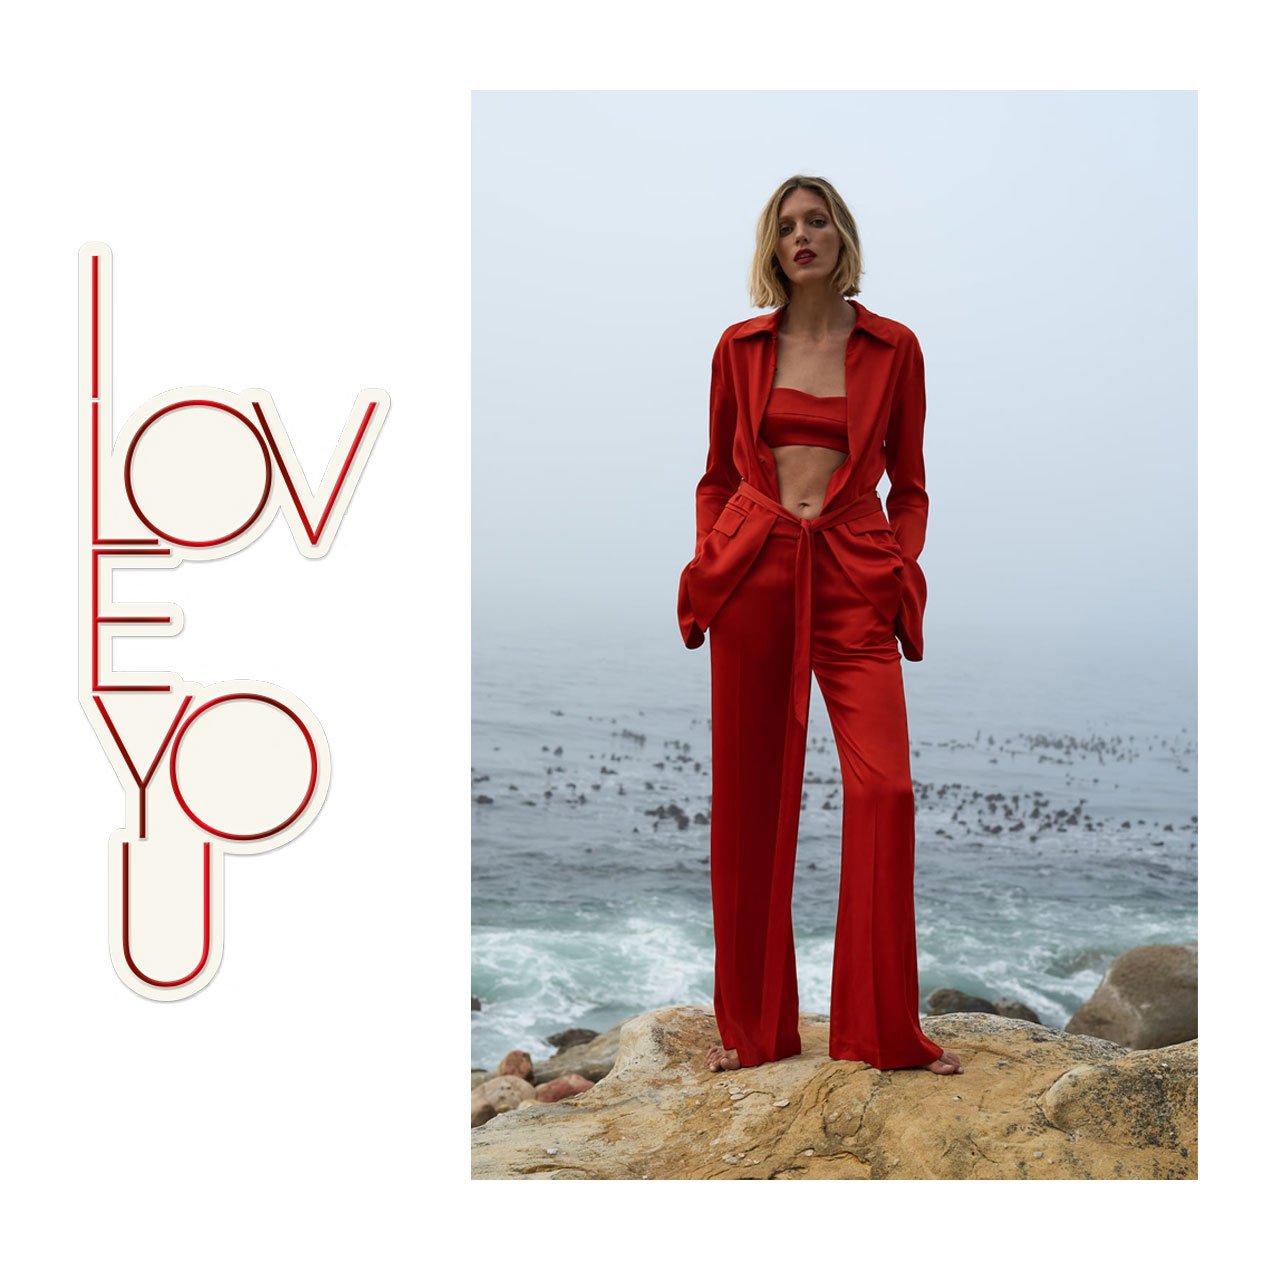 Zara USA: The Love collection | Milled